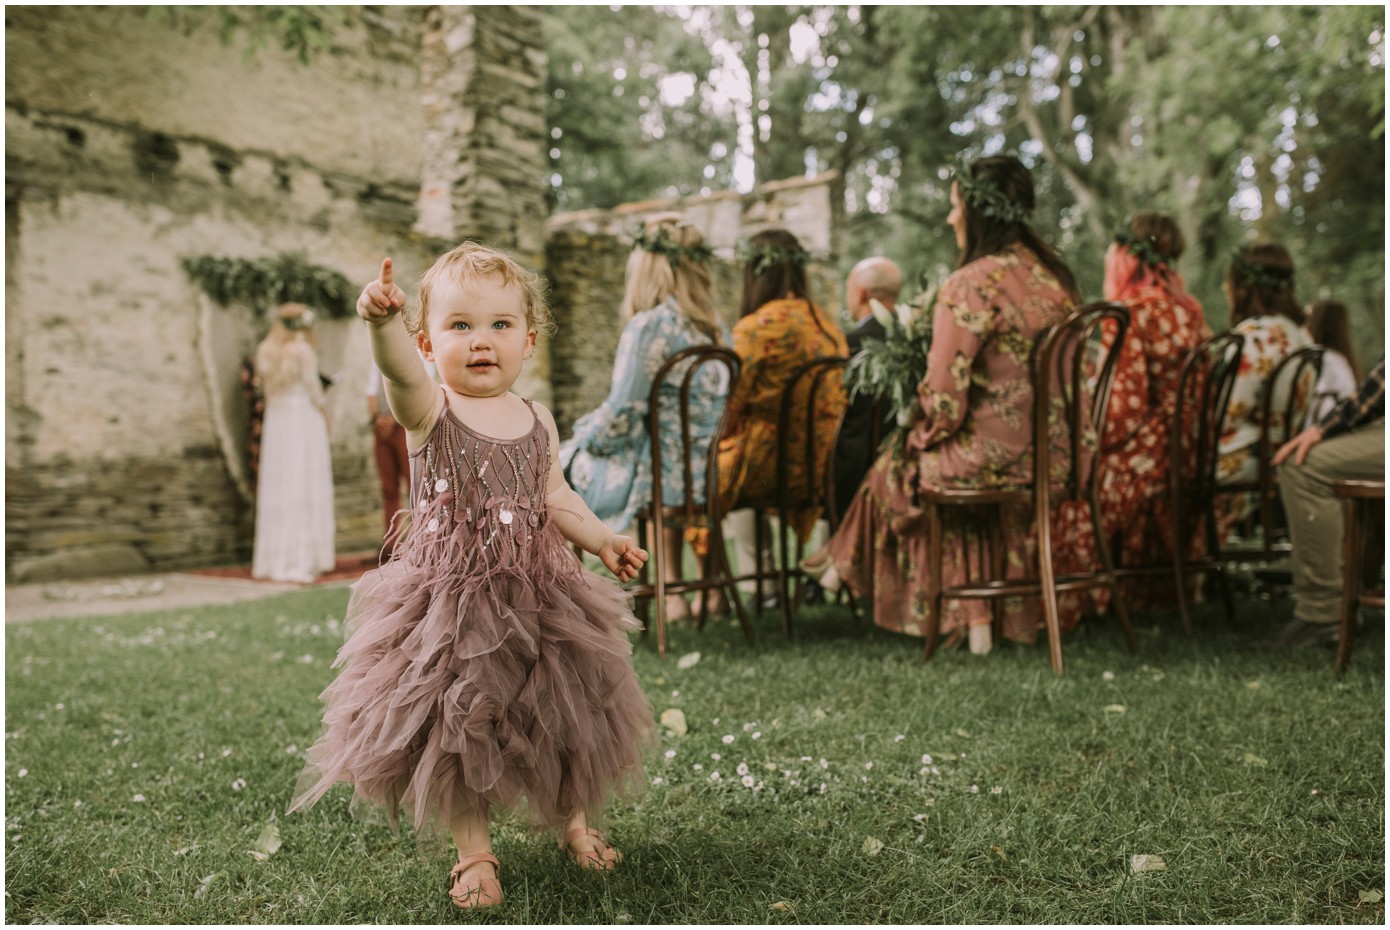 Charlotte Kiri Photography - Wedding Photography of a toddler wearing a muted plum dress and pointing at the camera, as the bride and groom exchange vows at the alter at Thurlby Domain in Arrowtown, New Zealand.